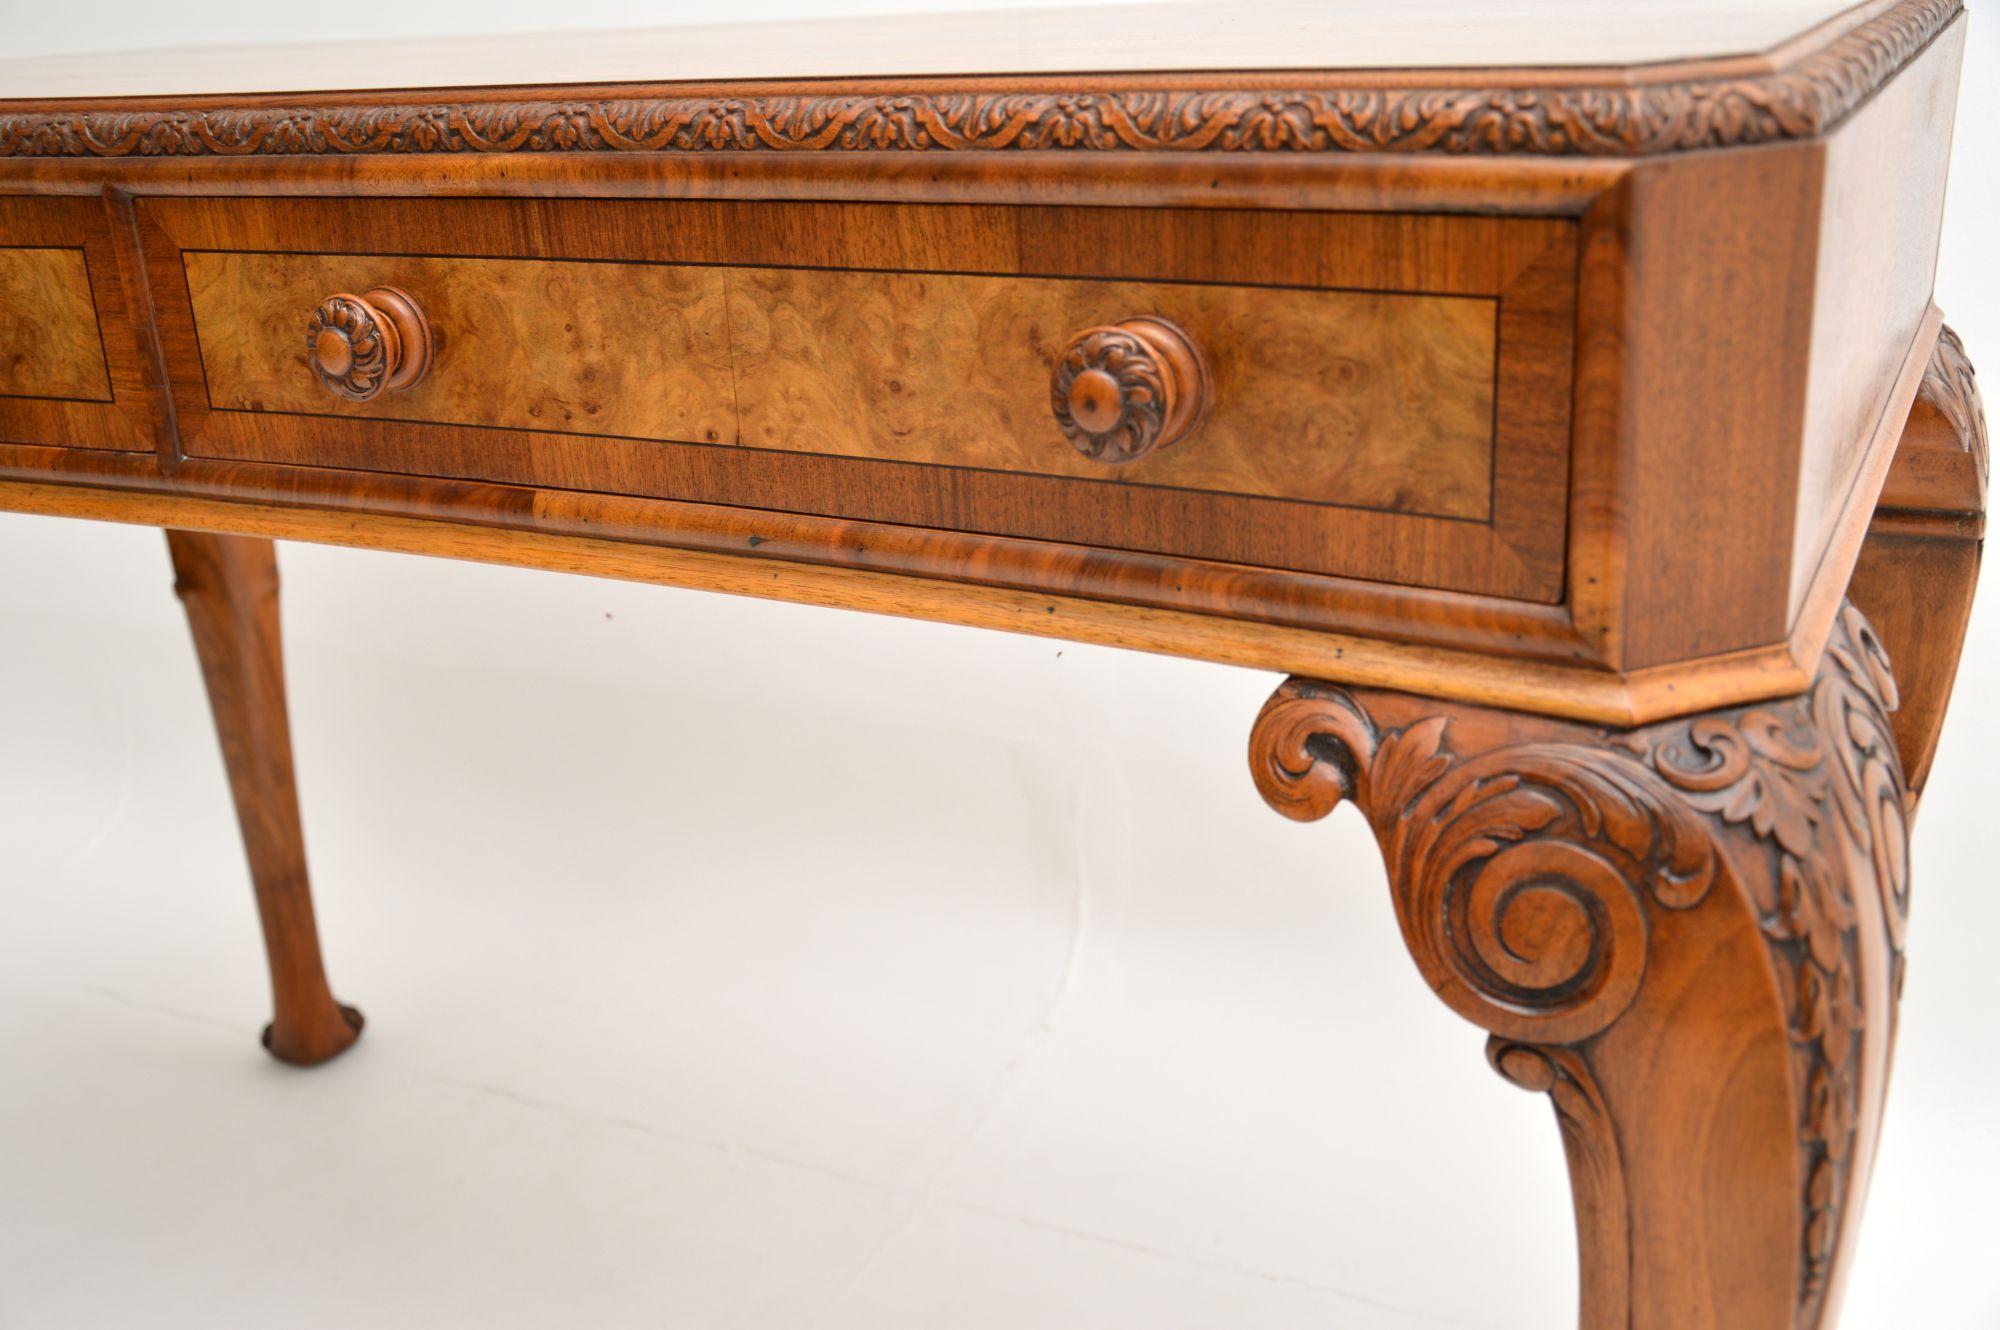 20th Century Antique Burr Walnut Queen Anne Style Console Server Table